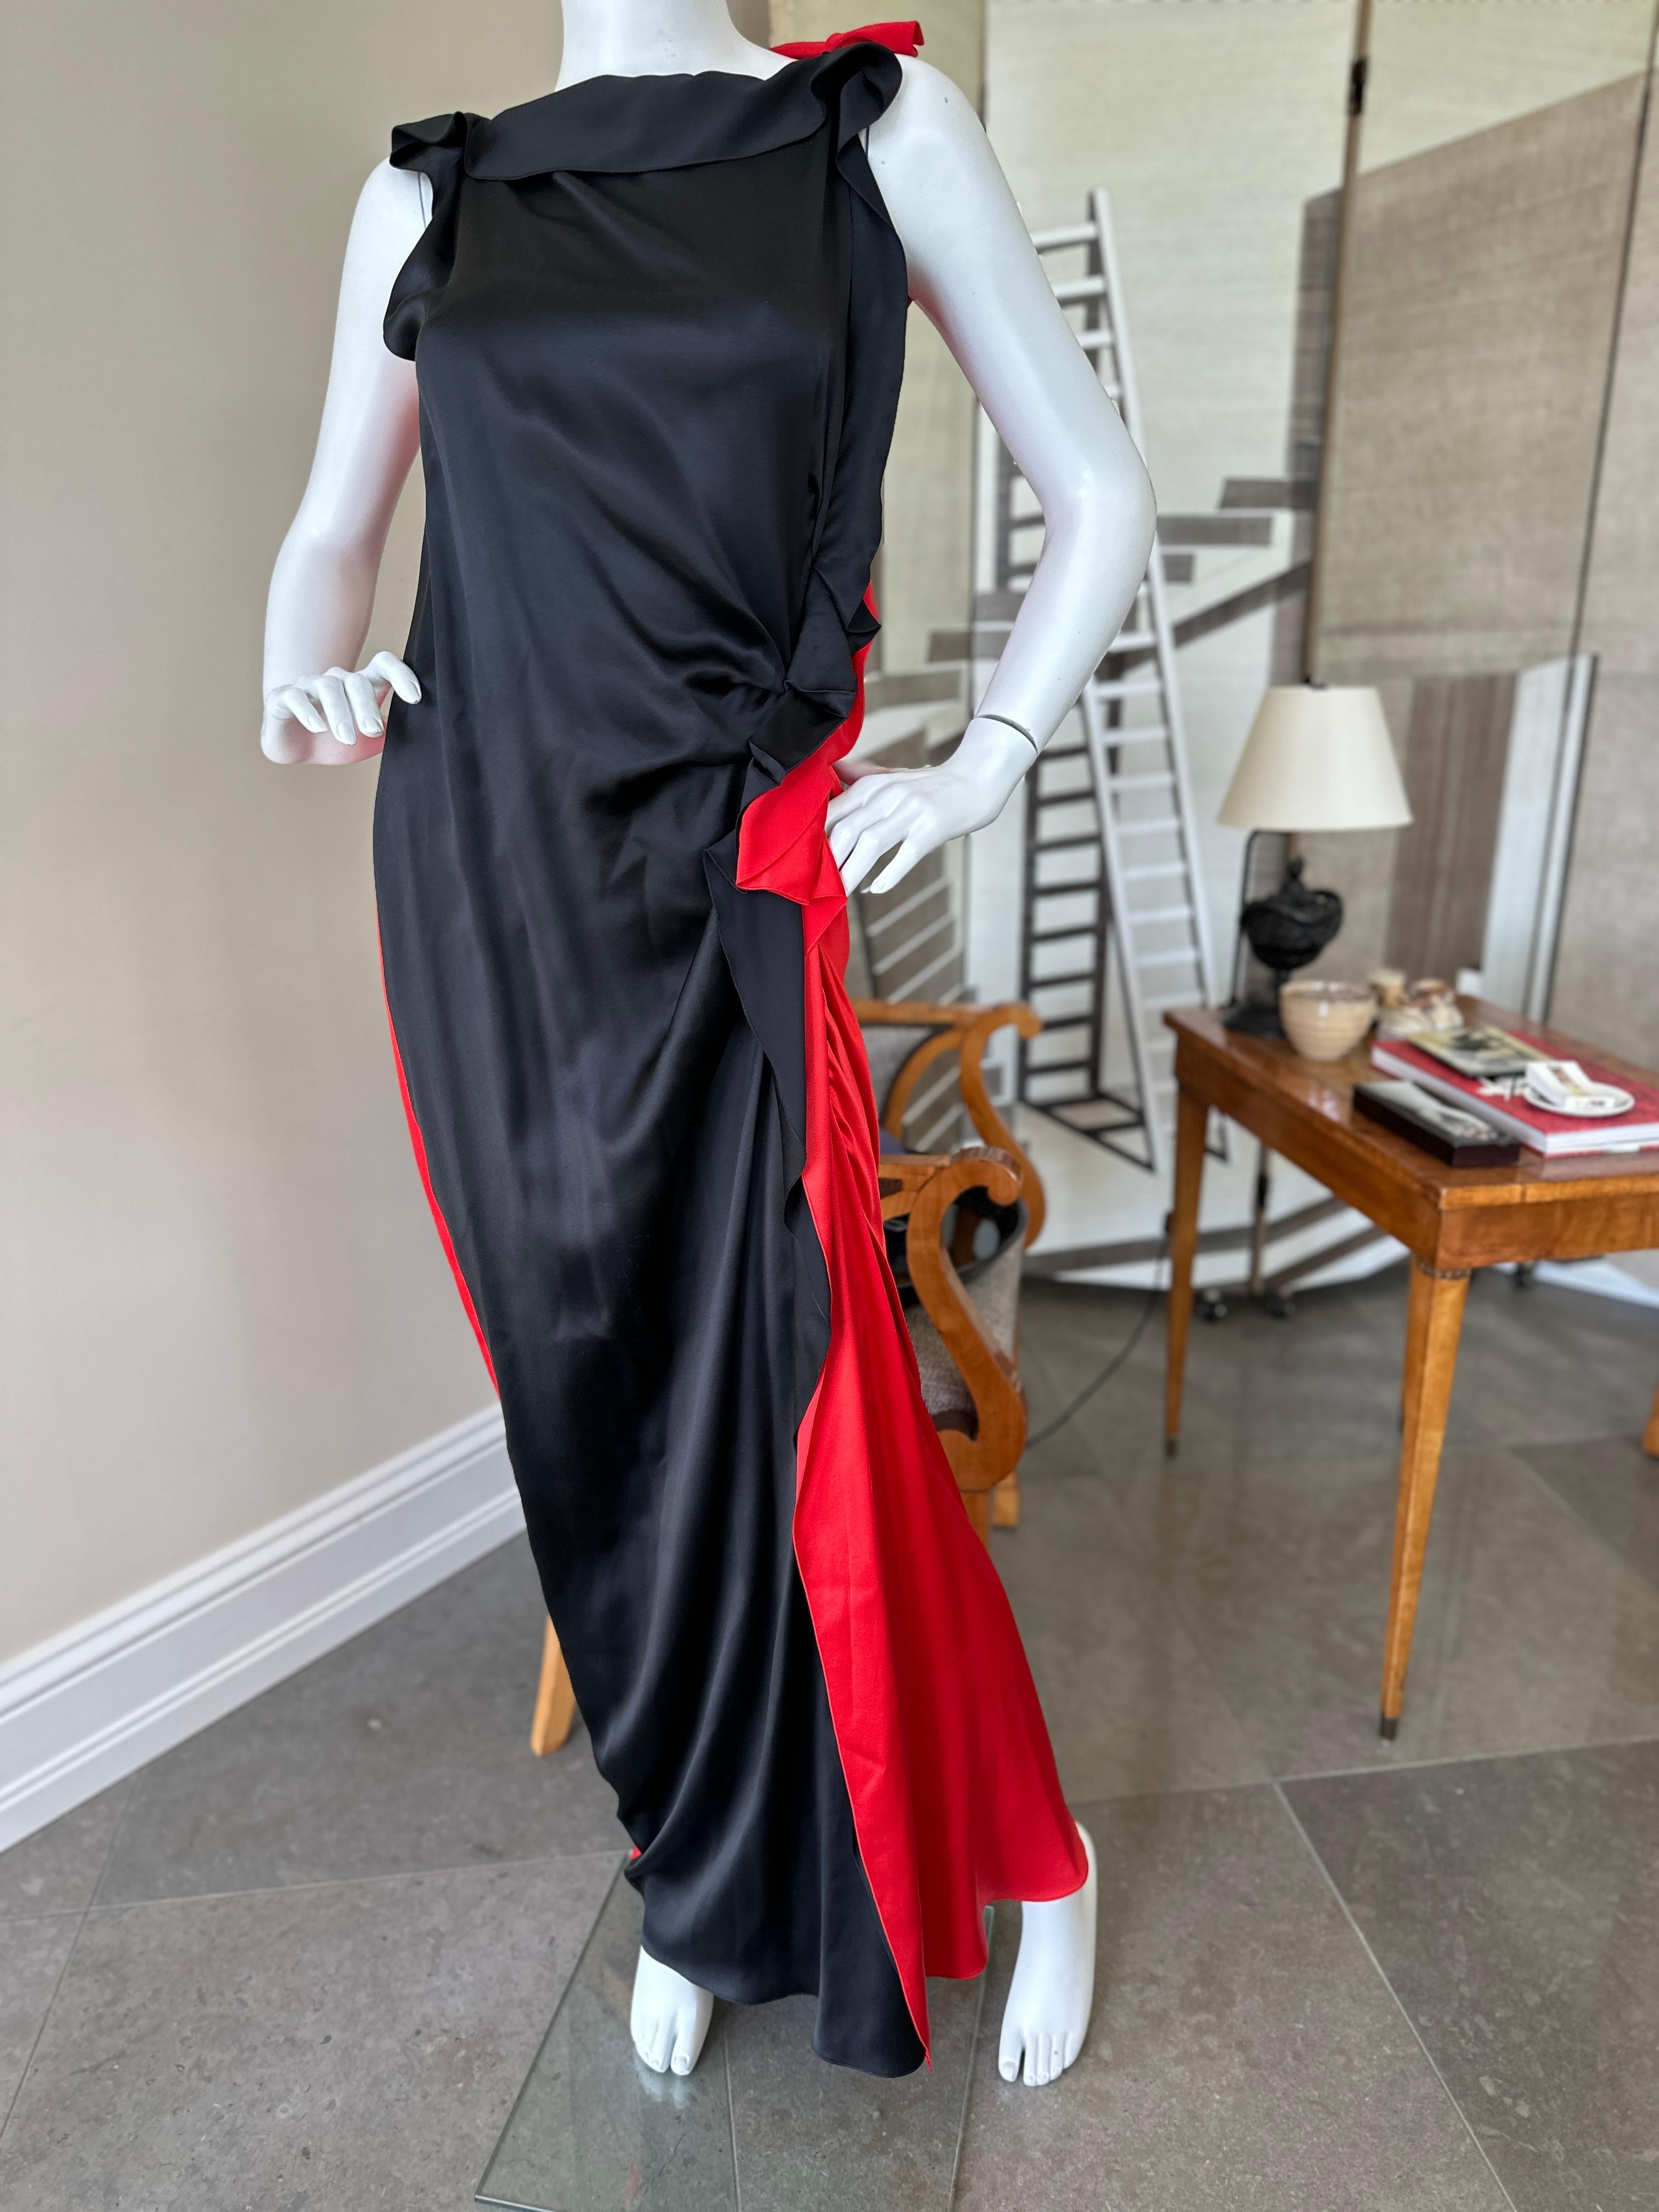 Lanvin by Alber Elbaz Silk Colorblock Evening Dress from Spring 2013
 So beautiful, much prettier in person.
Size 36 but runs large
 Bust 40